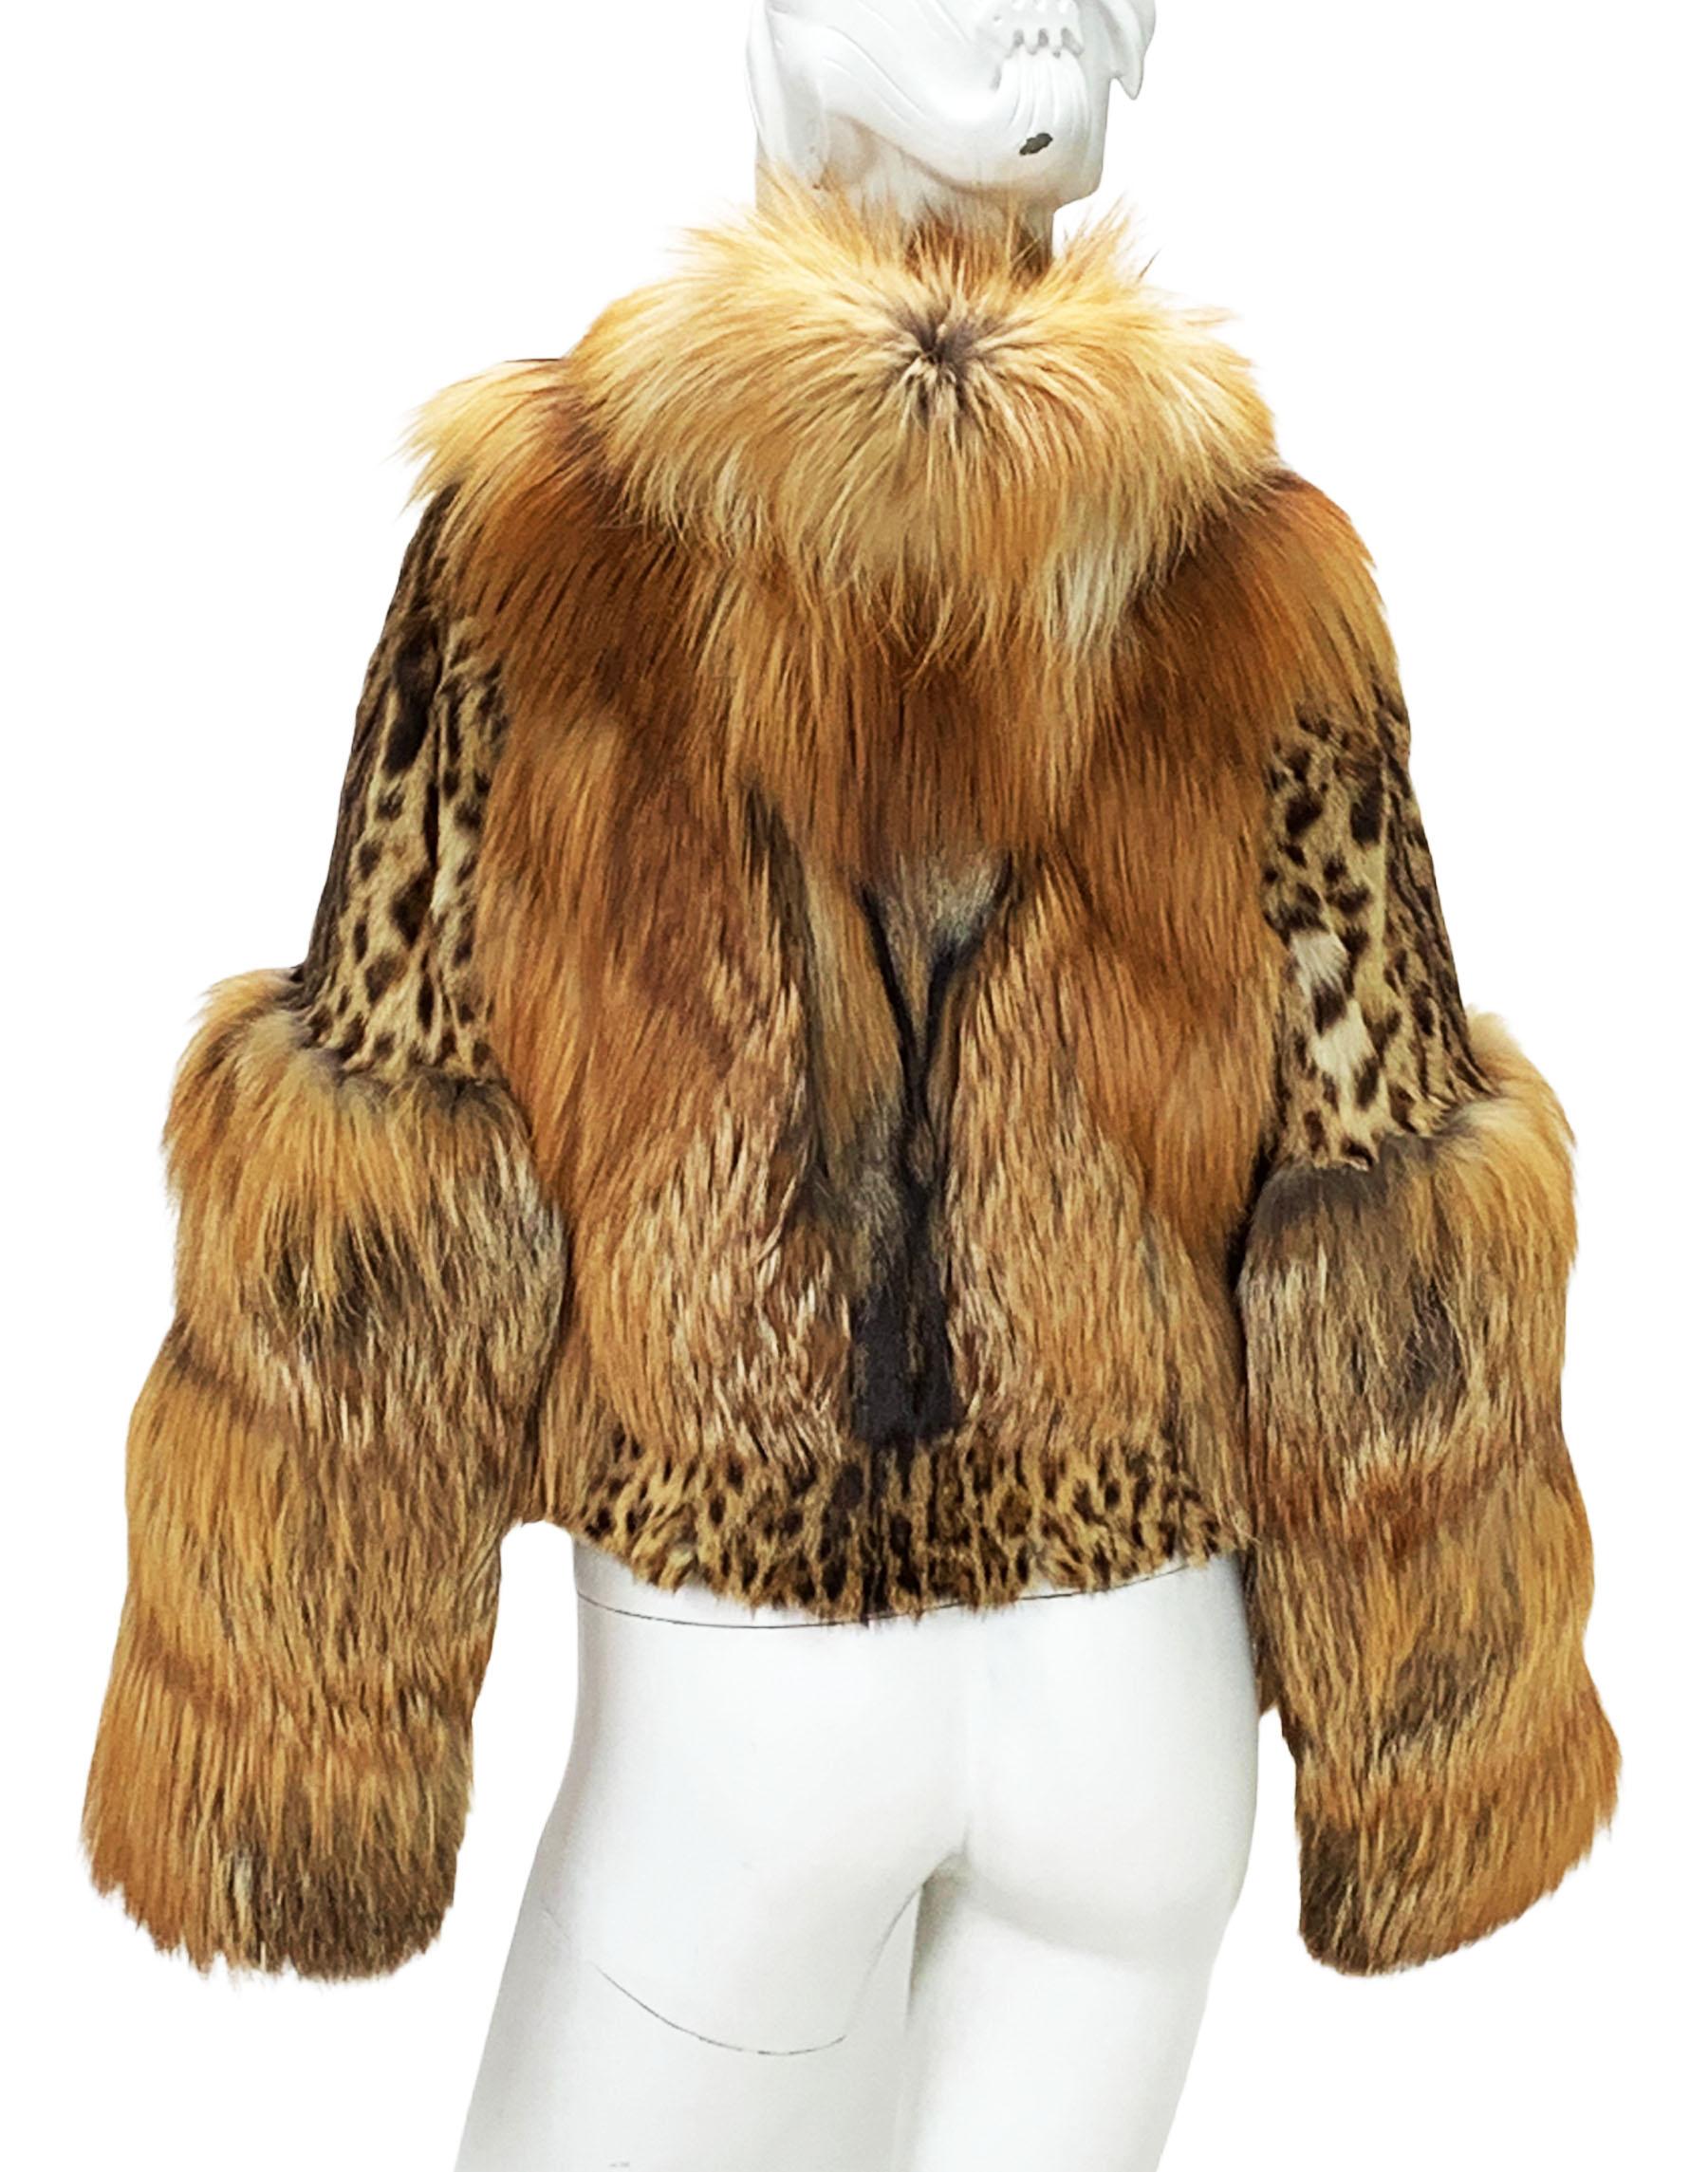 Museum Tom Ford for Gucci Runway F/W 1999 2 in 1 Fur Coat Jacket  For Sale 9